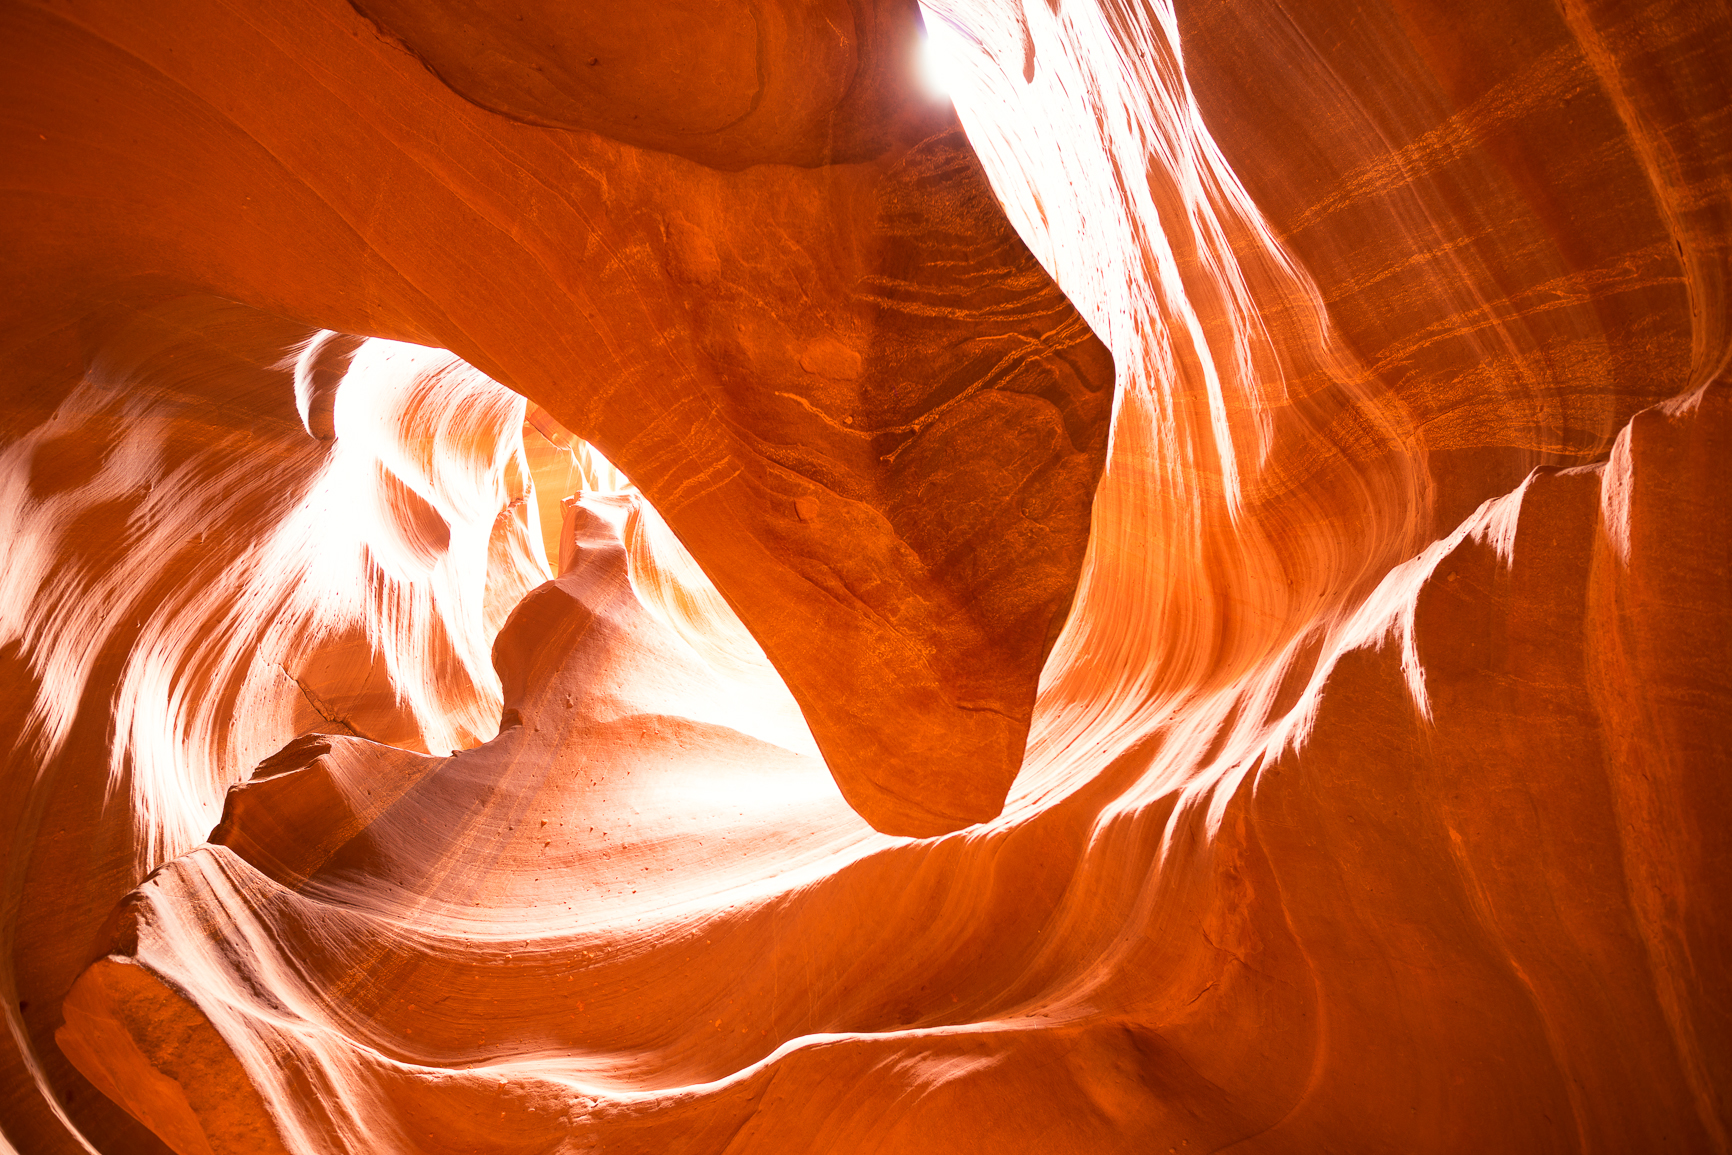 Love from the Antelope Canyons